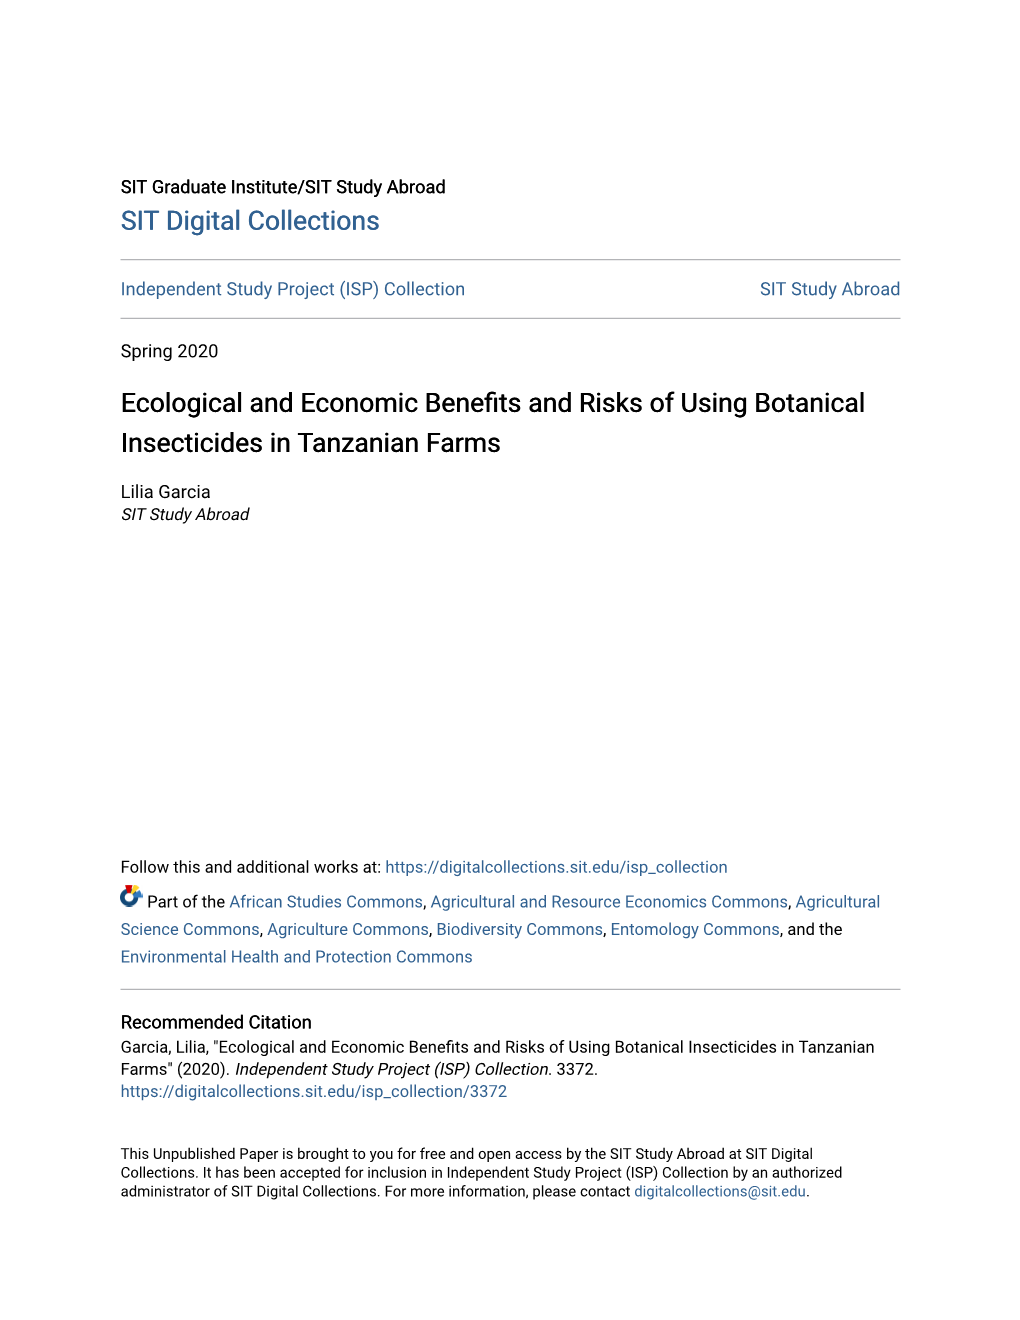 Ecological and Economic Benefits and Risks of Using Botanical Insecticides in Tanzanian Farms